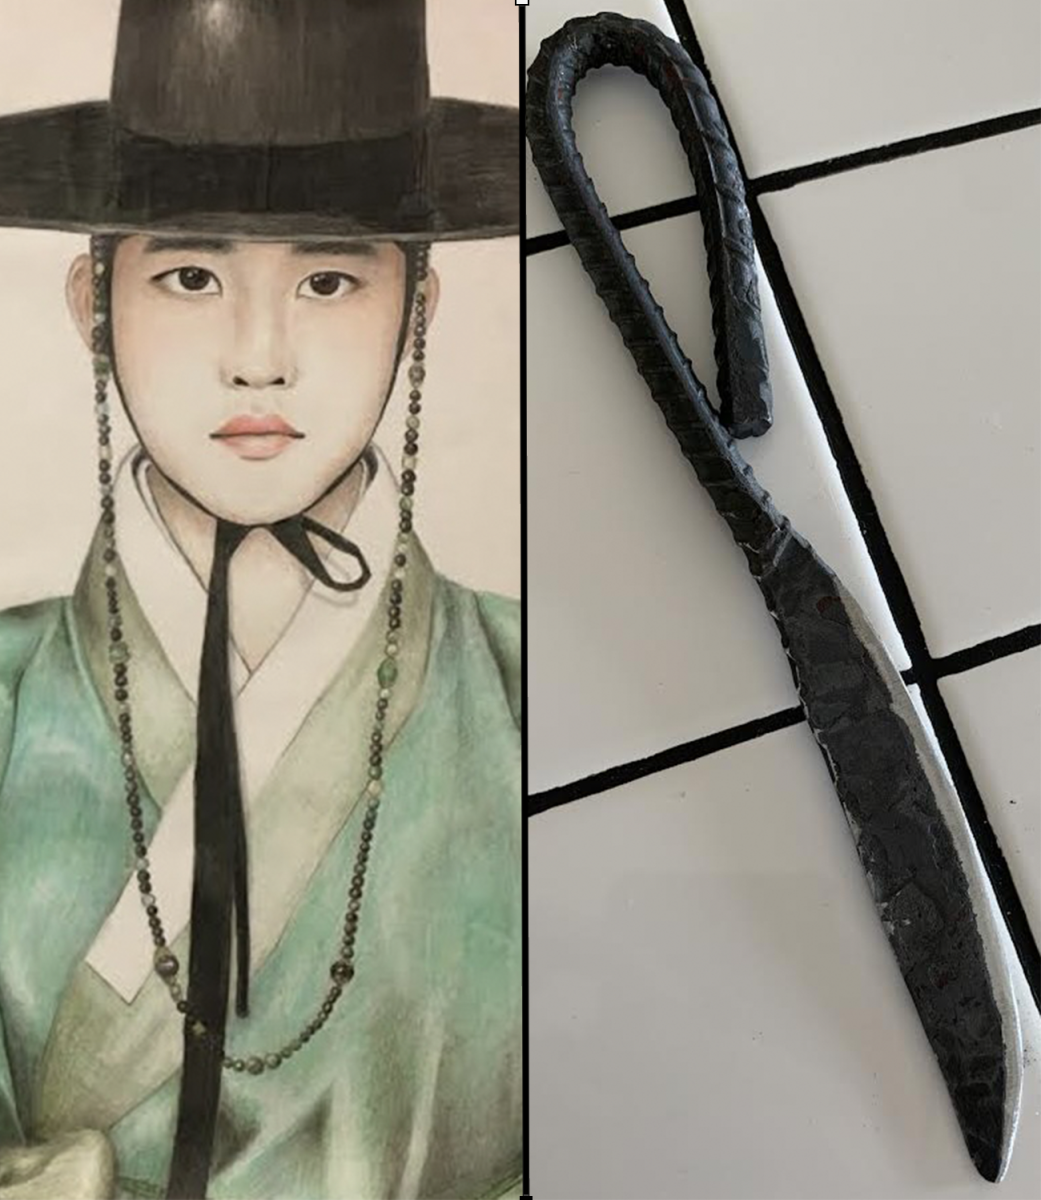 Left: Artwork by Alisa Thane called Kyung Soo. Right: Artwork by Dee Hill of a knife. Photos provided by Thane and Hill.